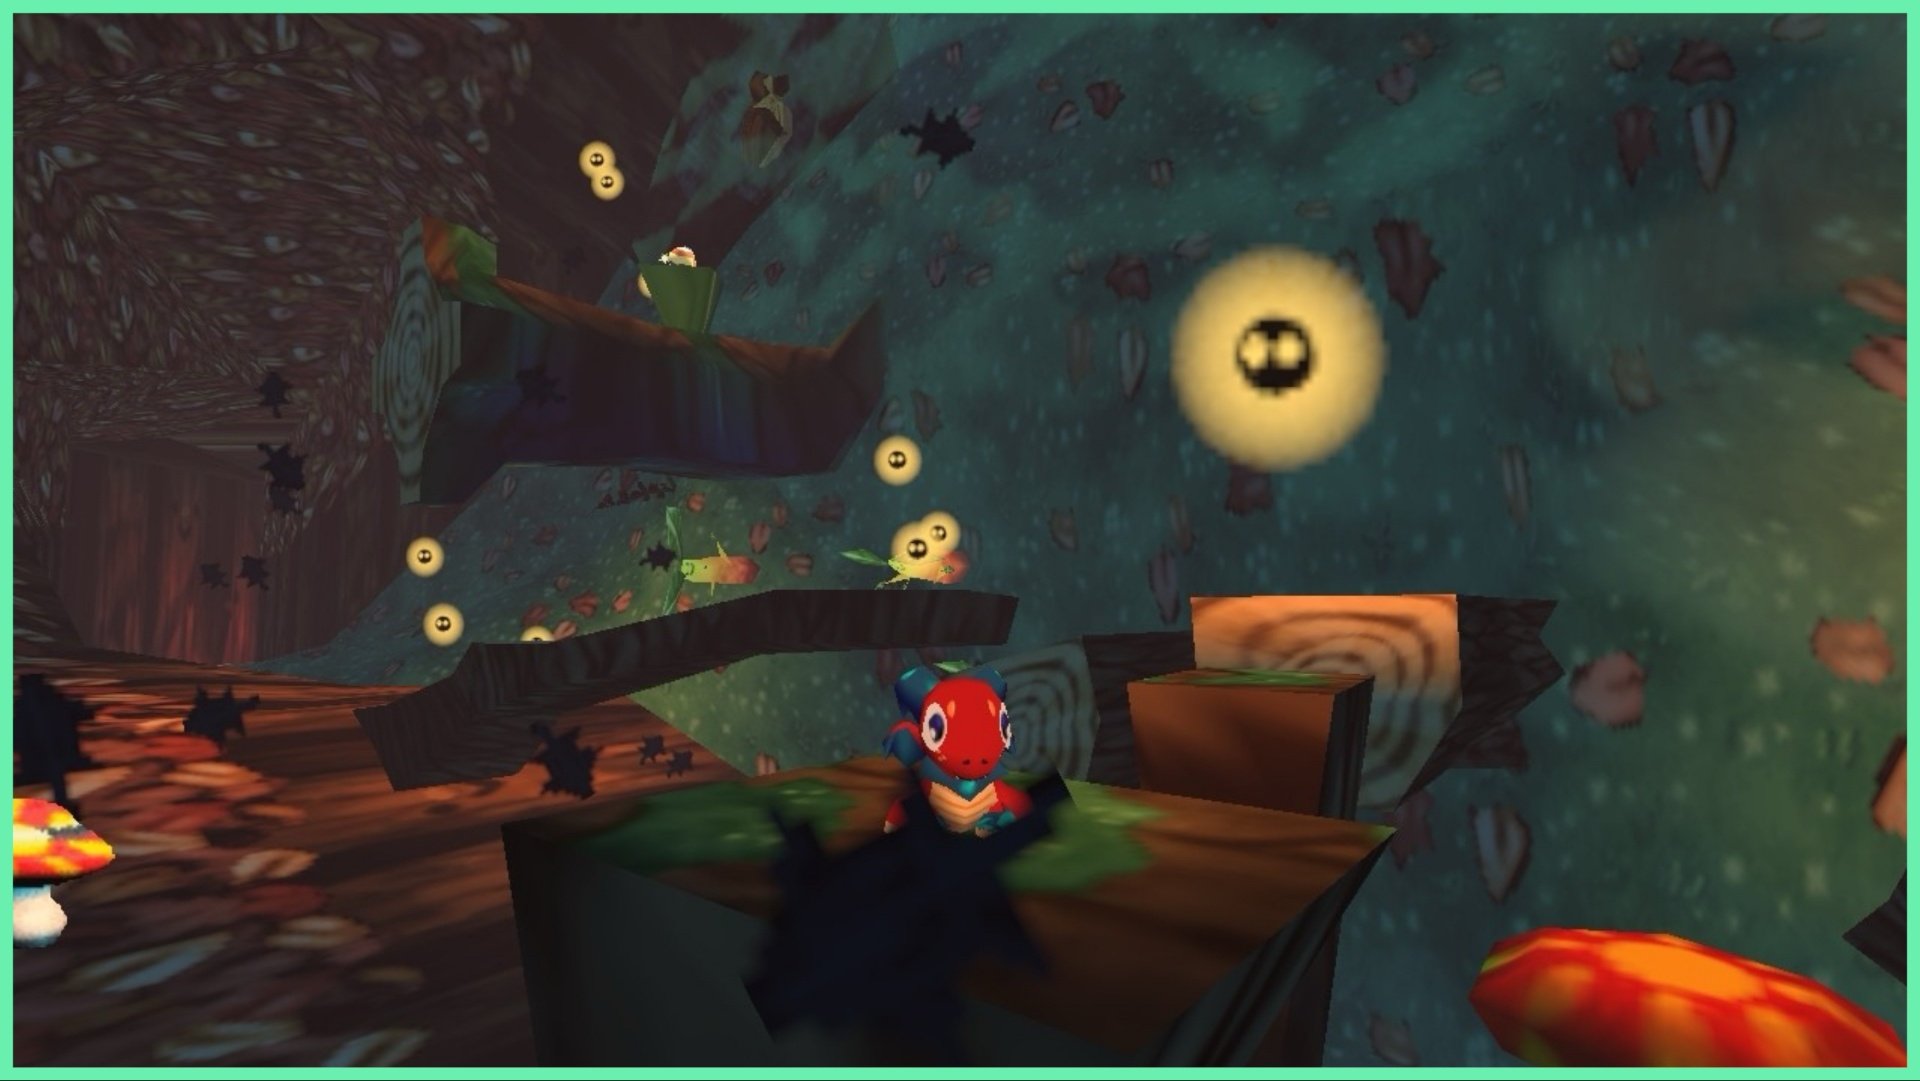 The image shows the red dragon, Fynn sat down in a woodland area with glowing soot sprites floating between trees. The ambience of the screenshot is rather magical with soft golden lighting reaching the wooden platforms